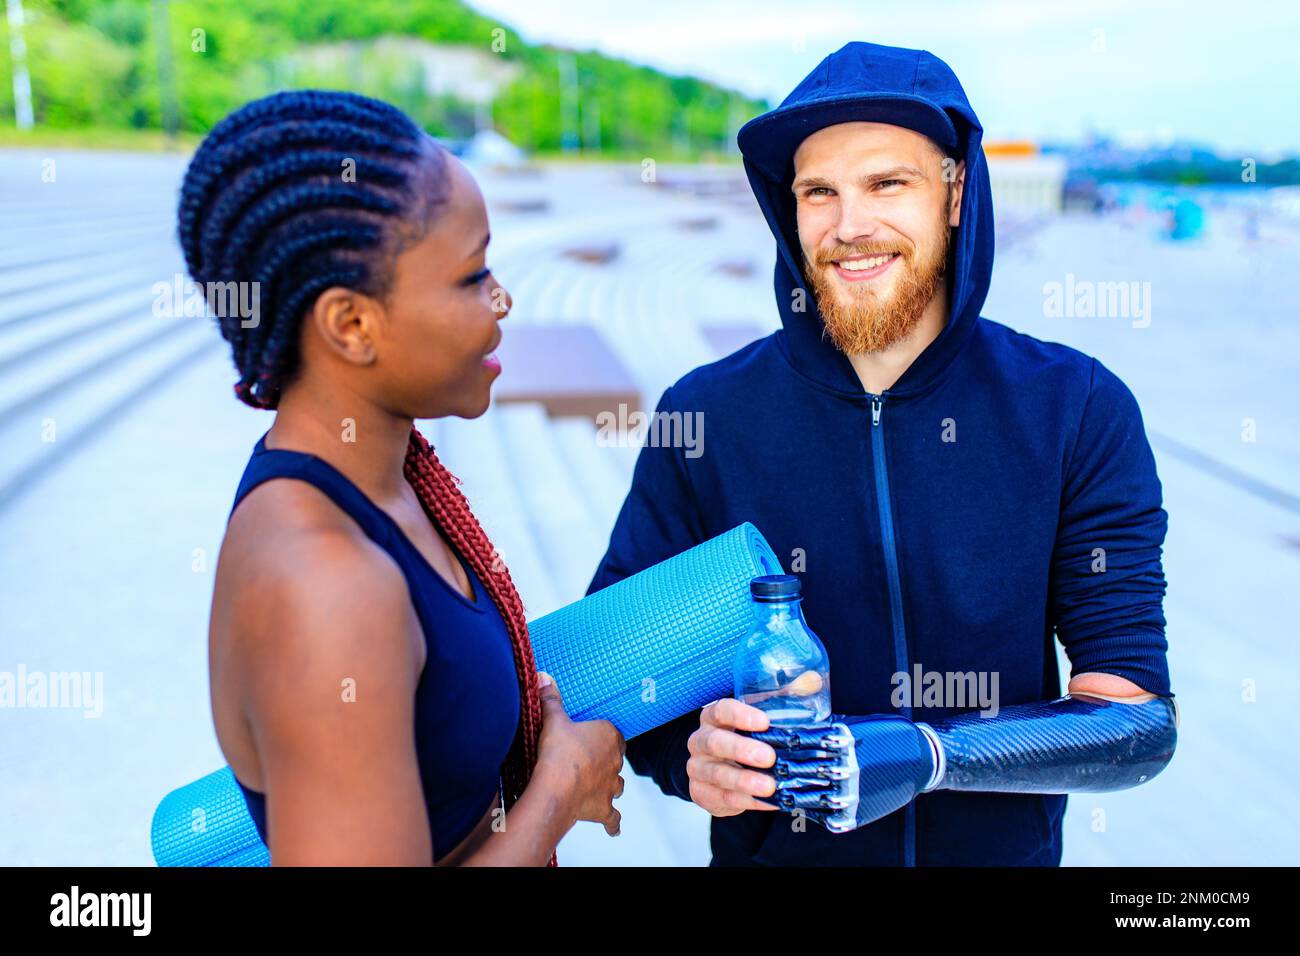 mixed race friends fitness training together outdoors summer morning Stock Photo